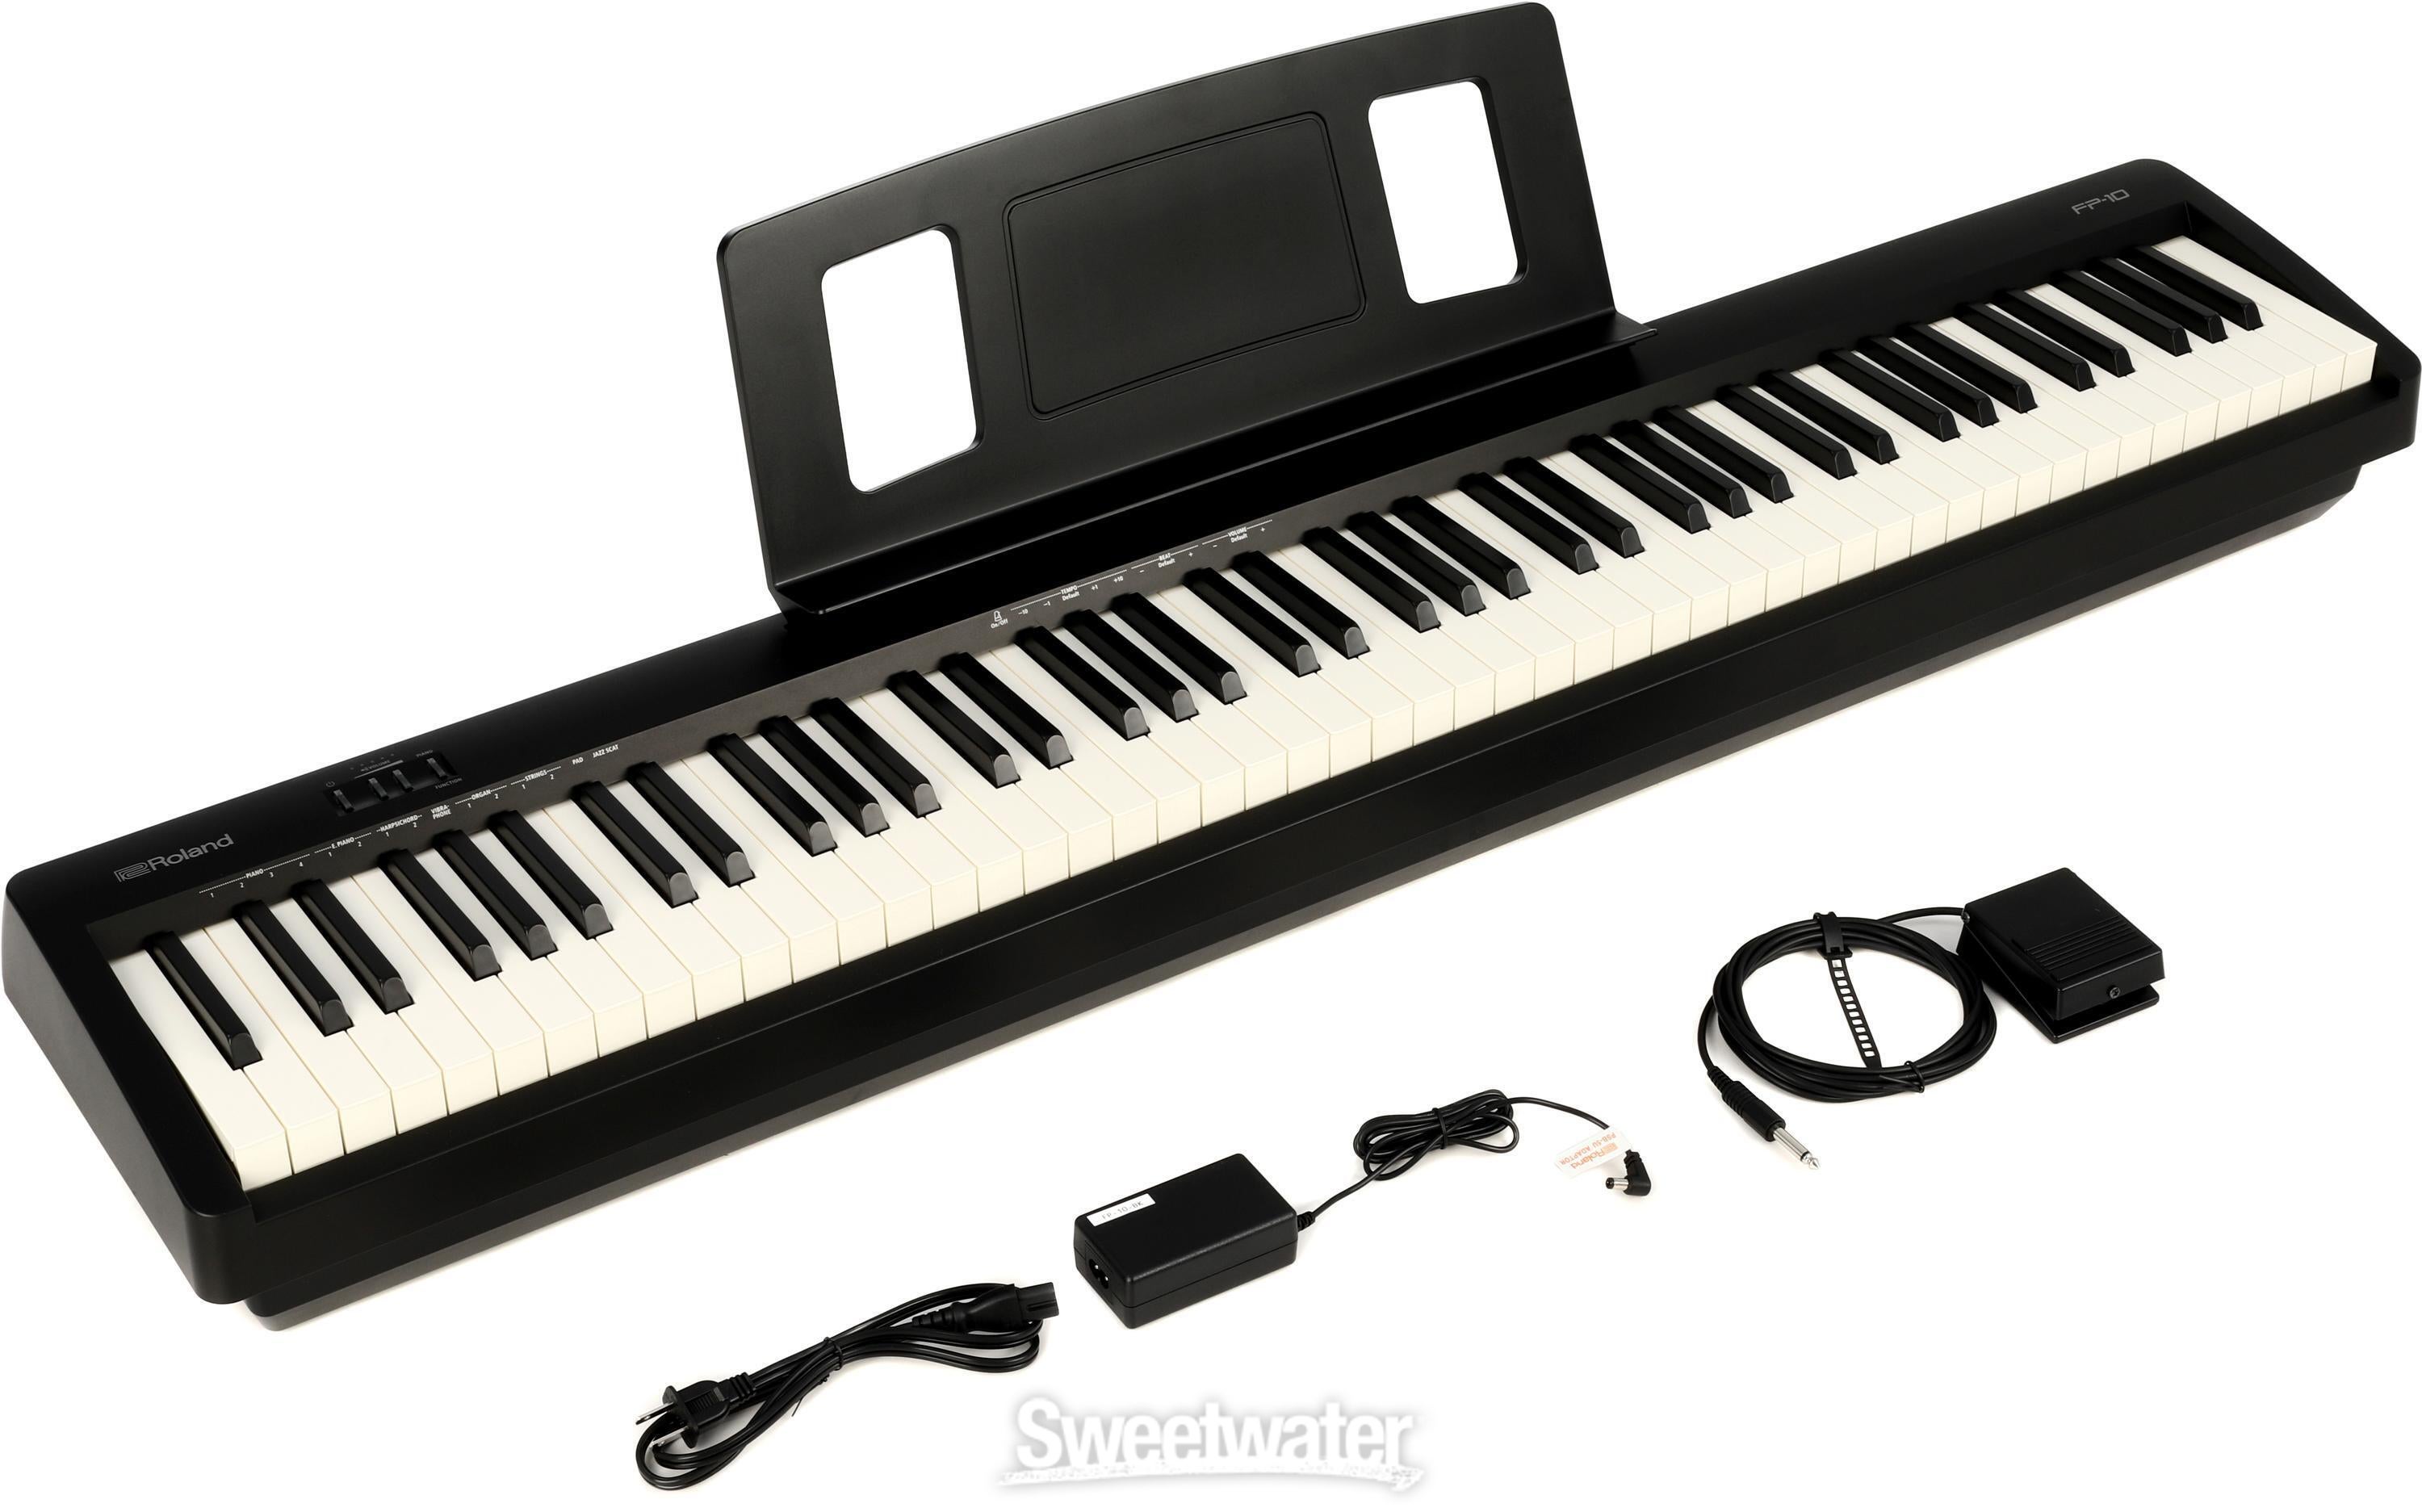 Roland FP-10 Digital Piano | Sweetwater